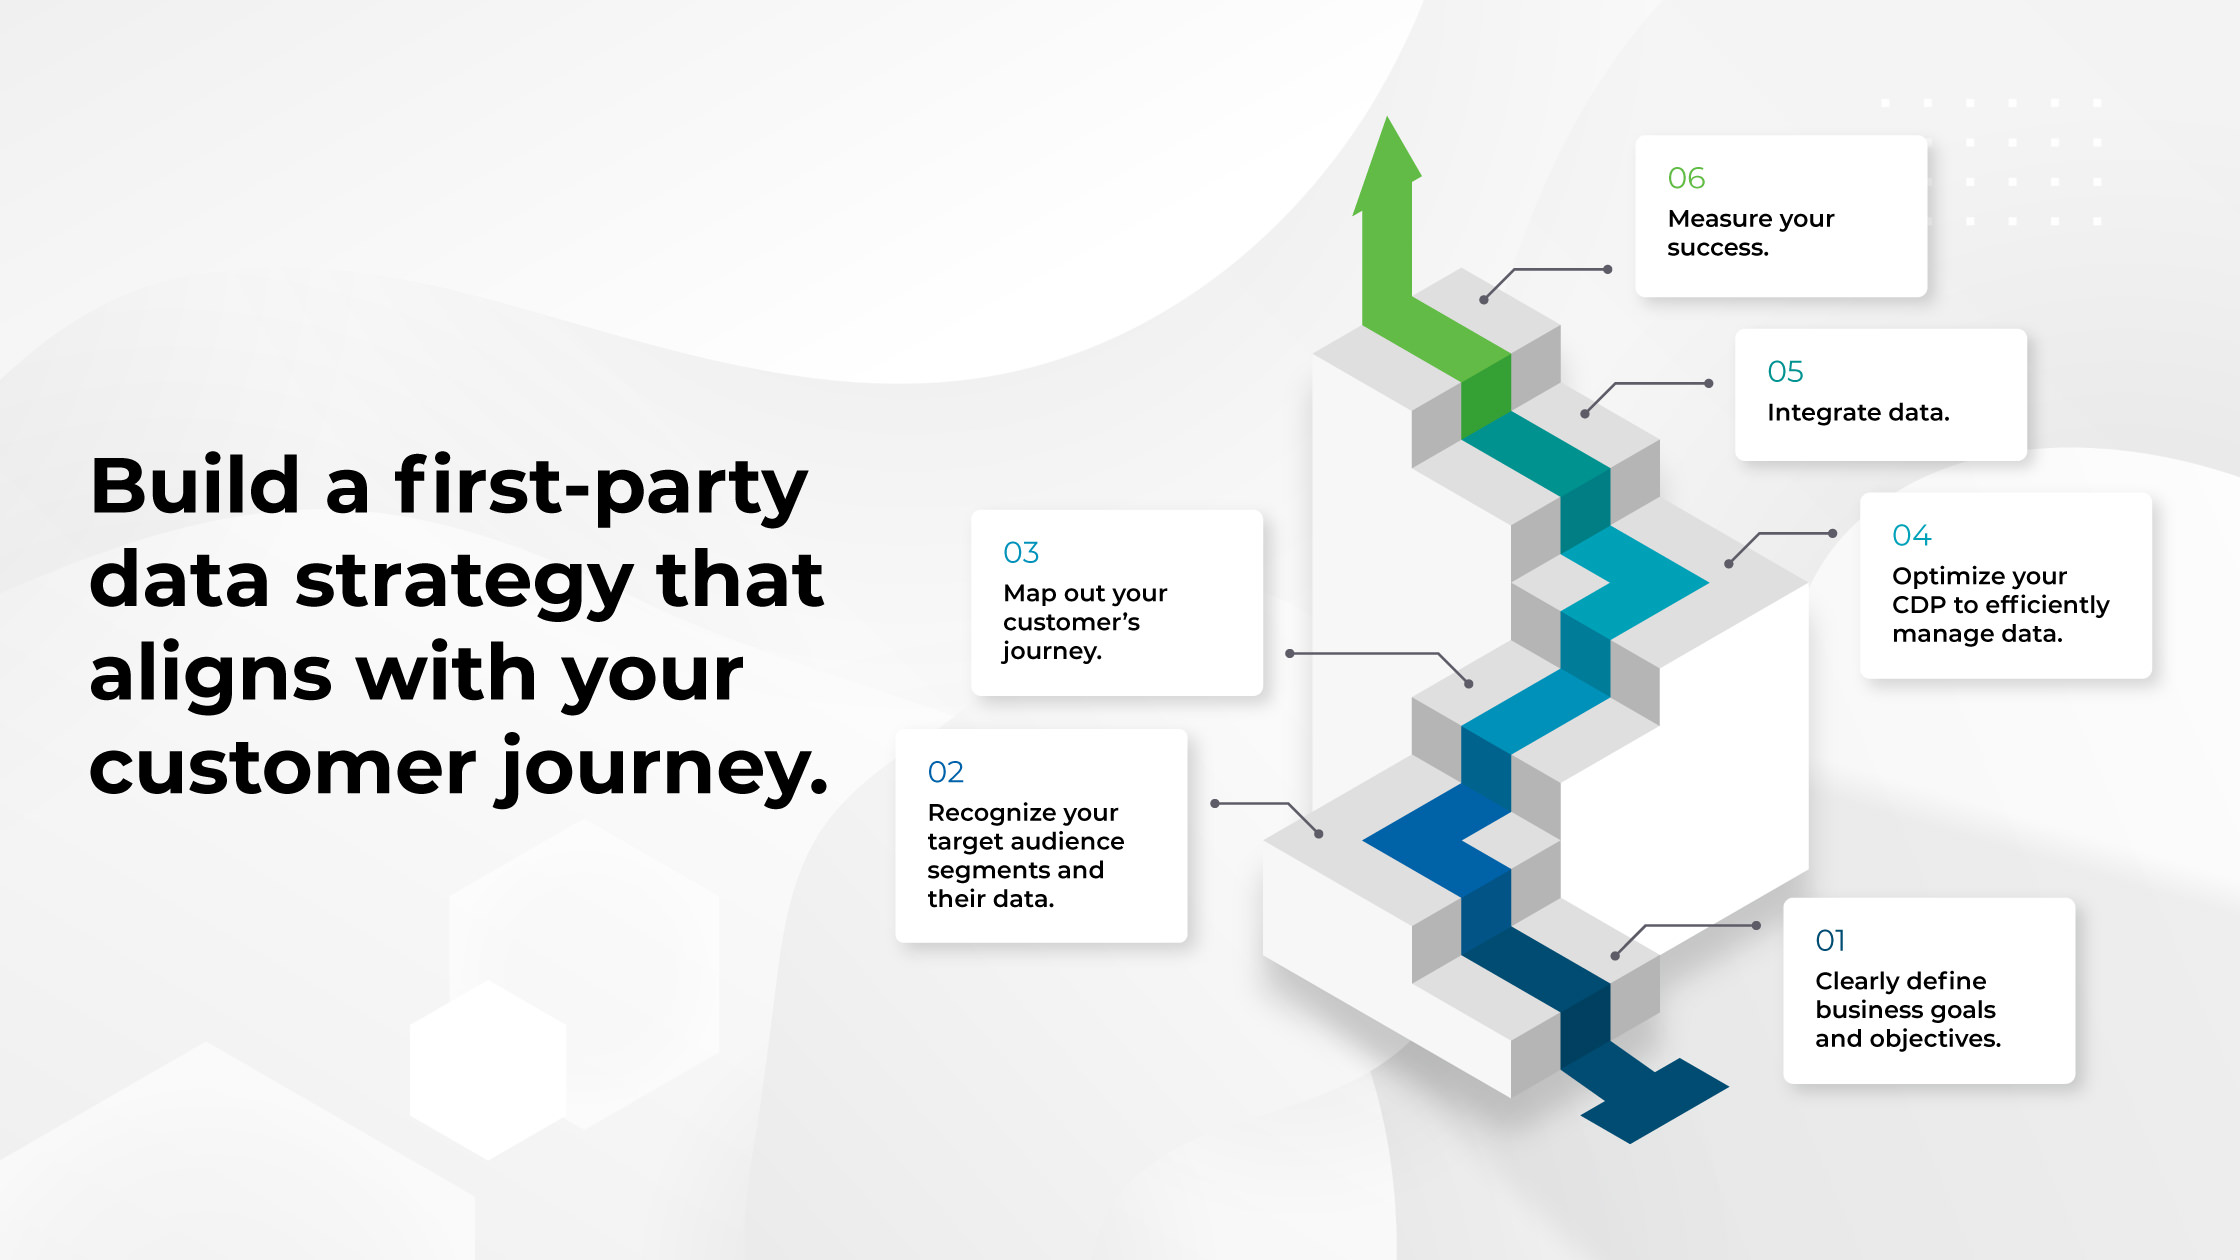 Build a first-party data strategy that aligns with your customer journey.